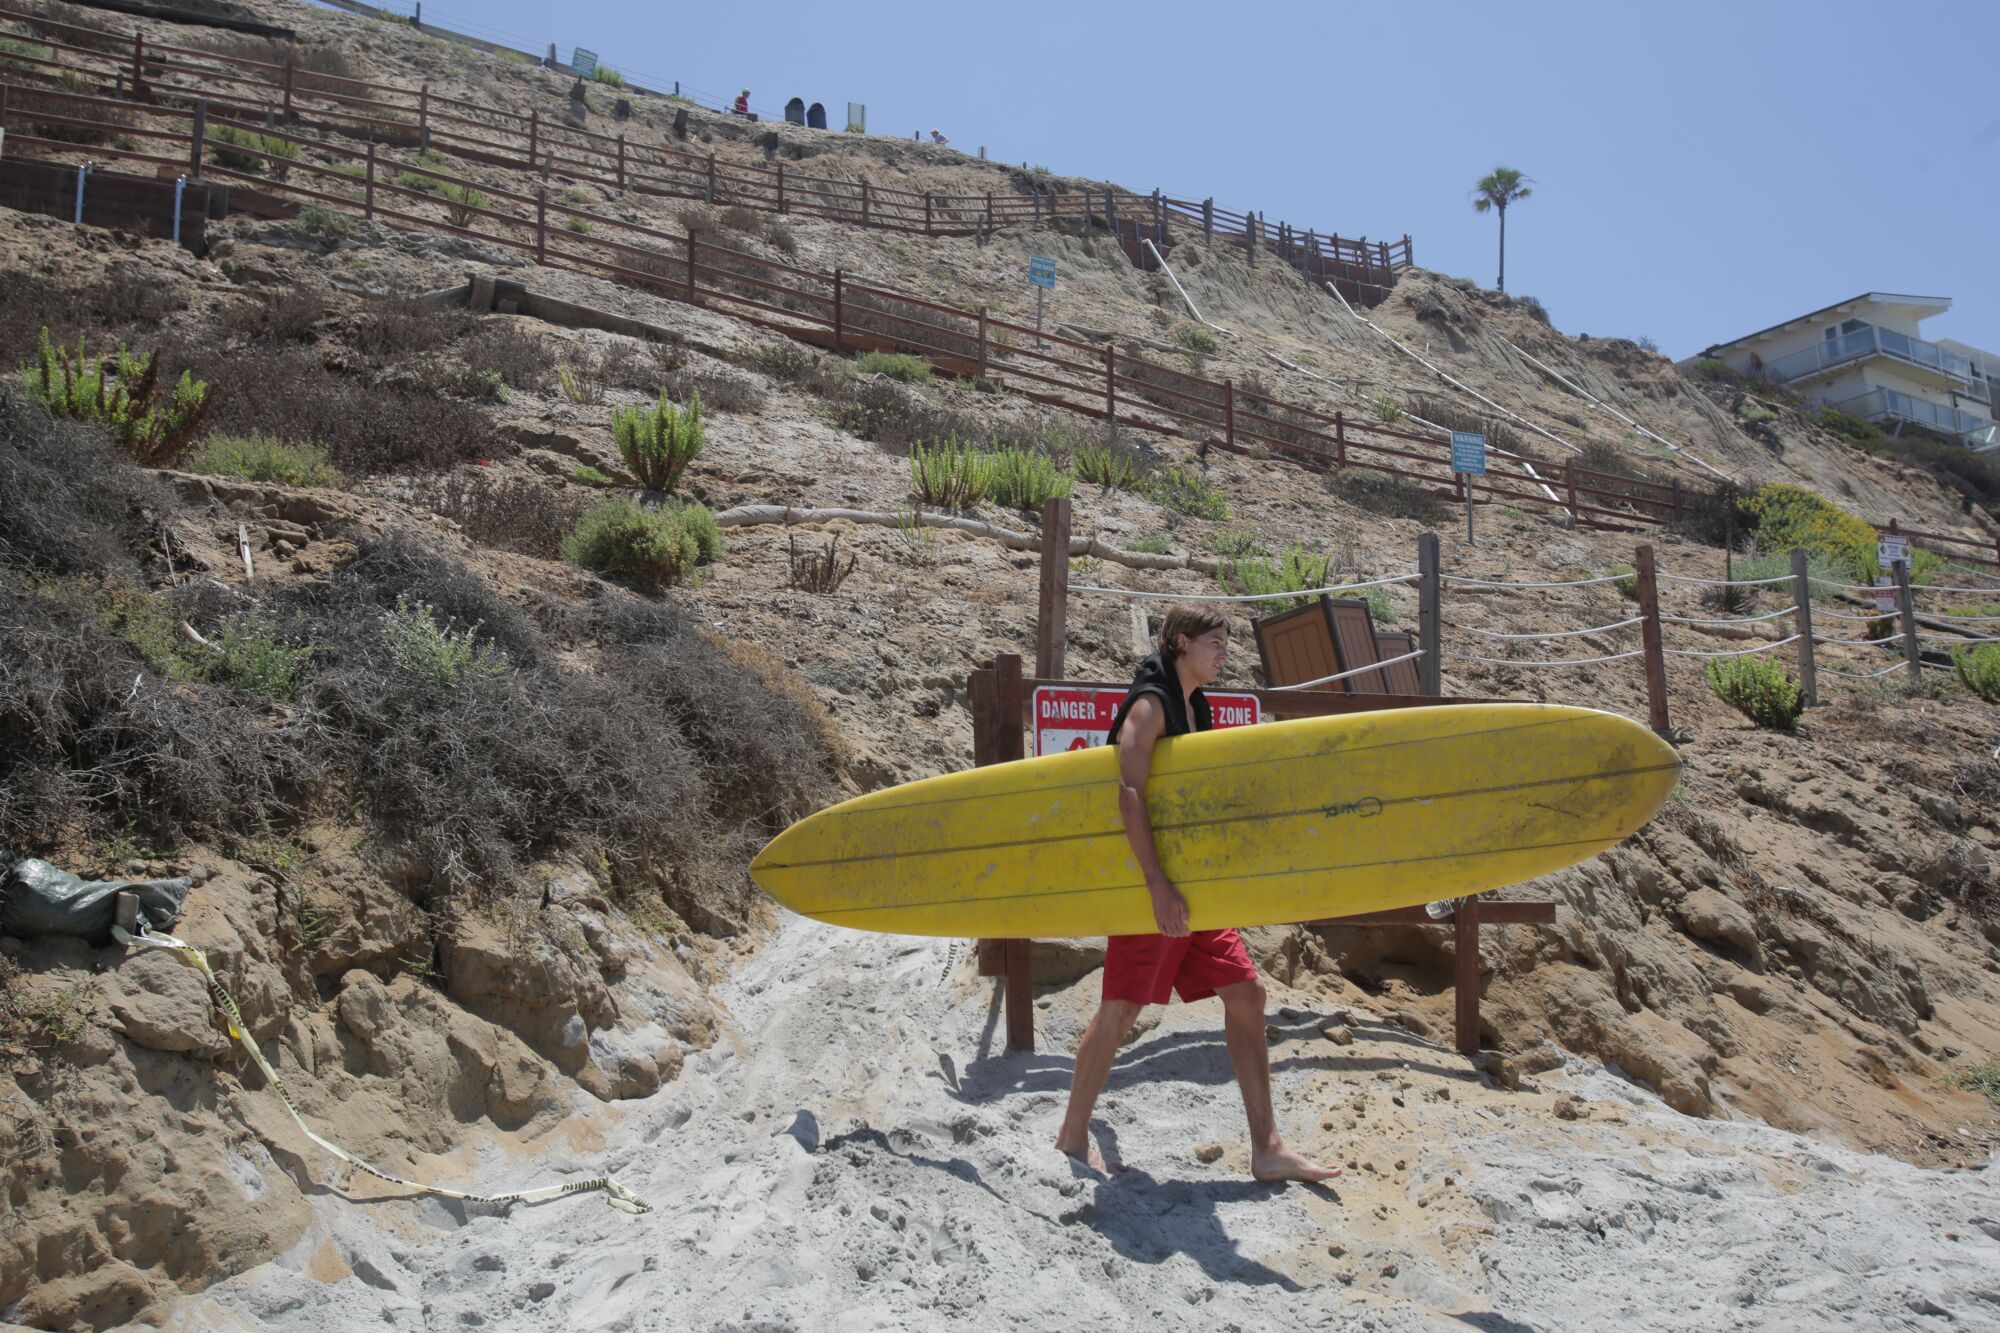 Kyle Roy, 19, reaches the base of the stairs at Beacon's Beach in Encinitas, CA .